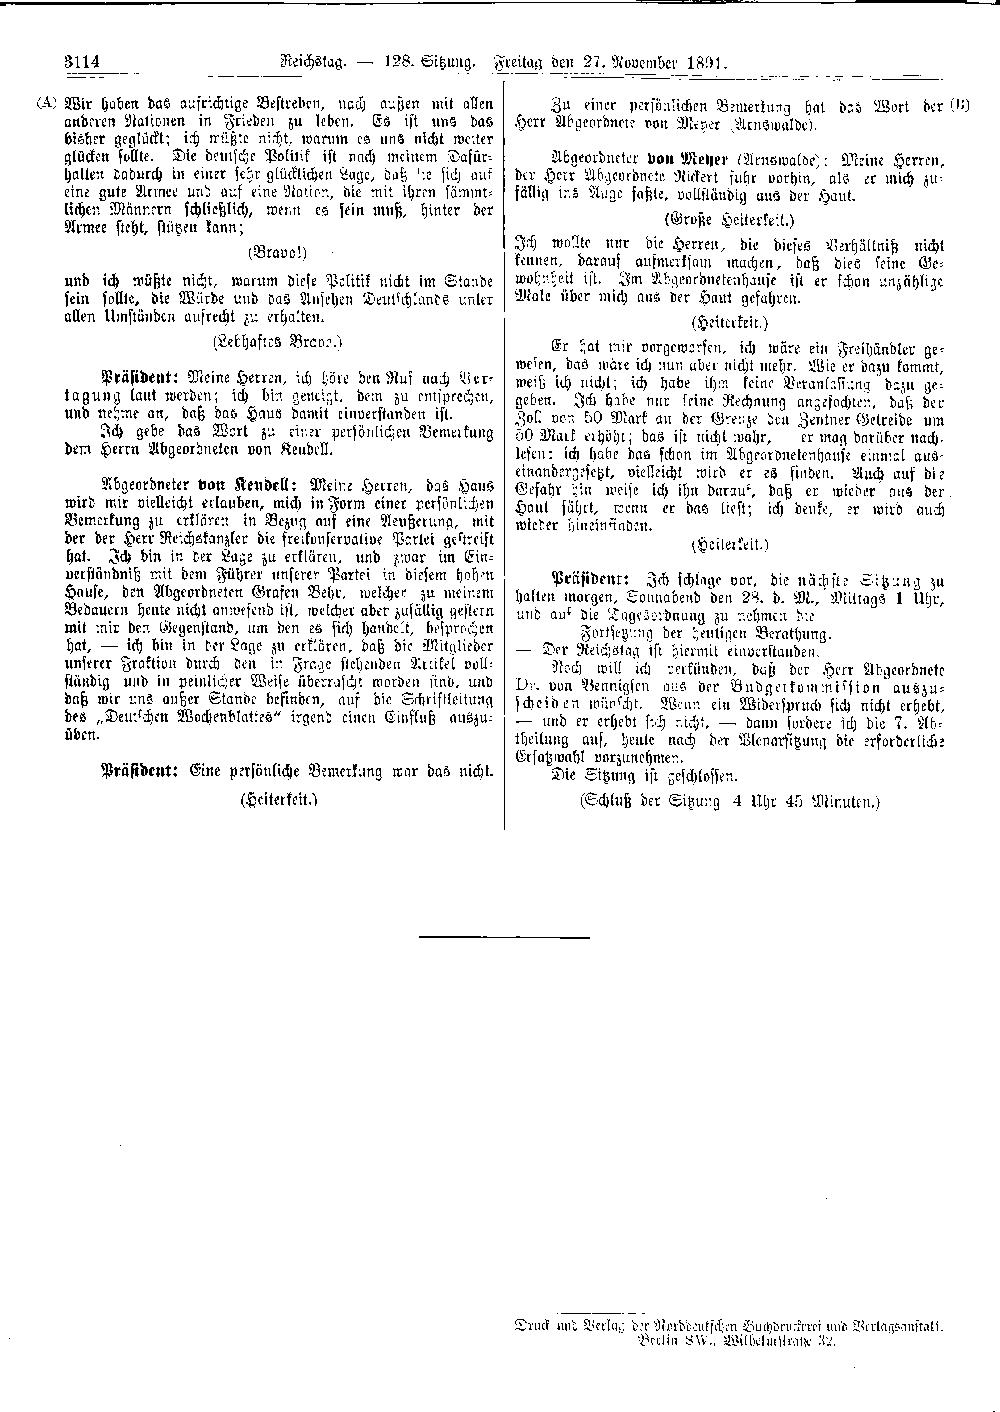 Scan of page 3114